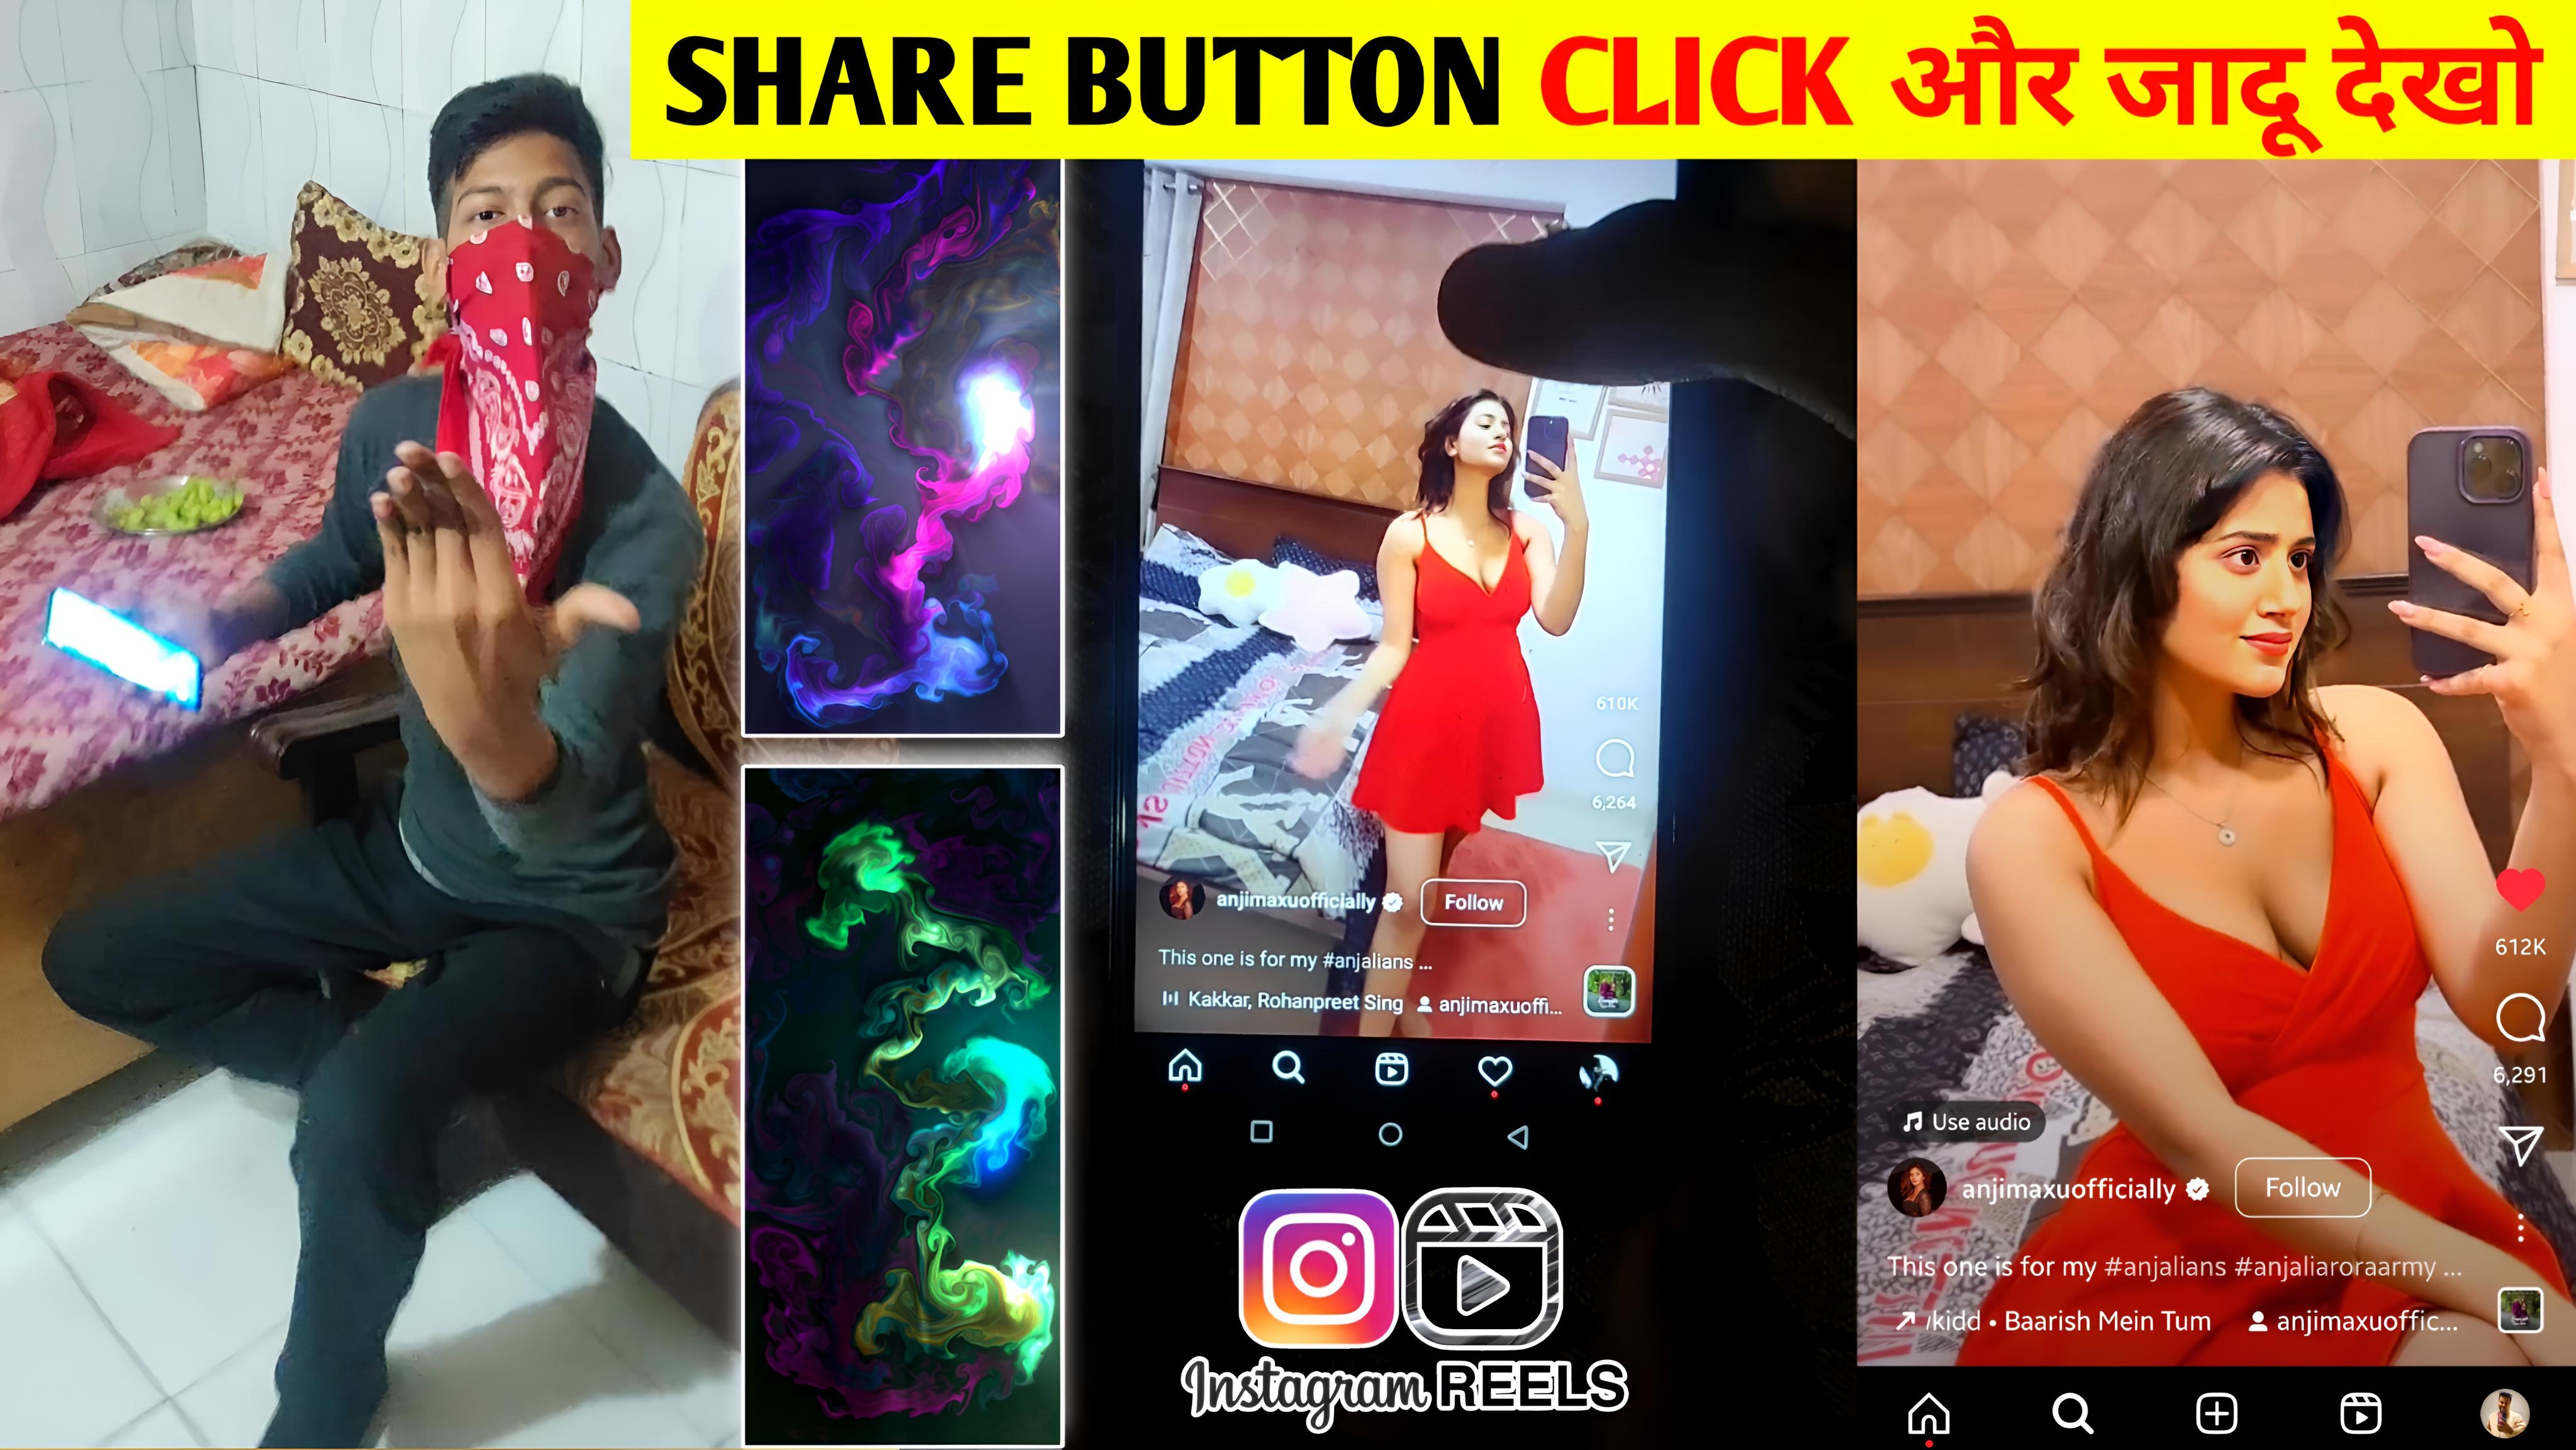 Share Button Magic Reels Video || Instagram Reels Video Editing || Kinemaster Editing